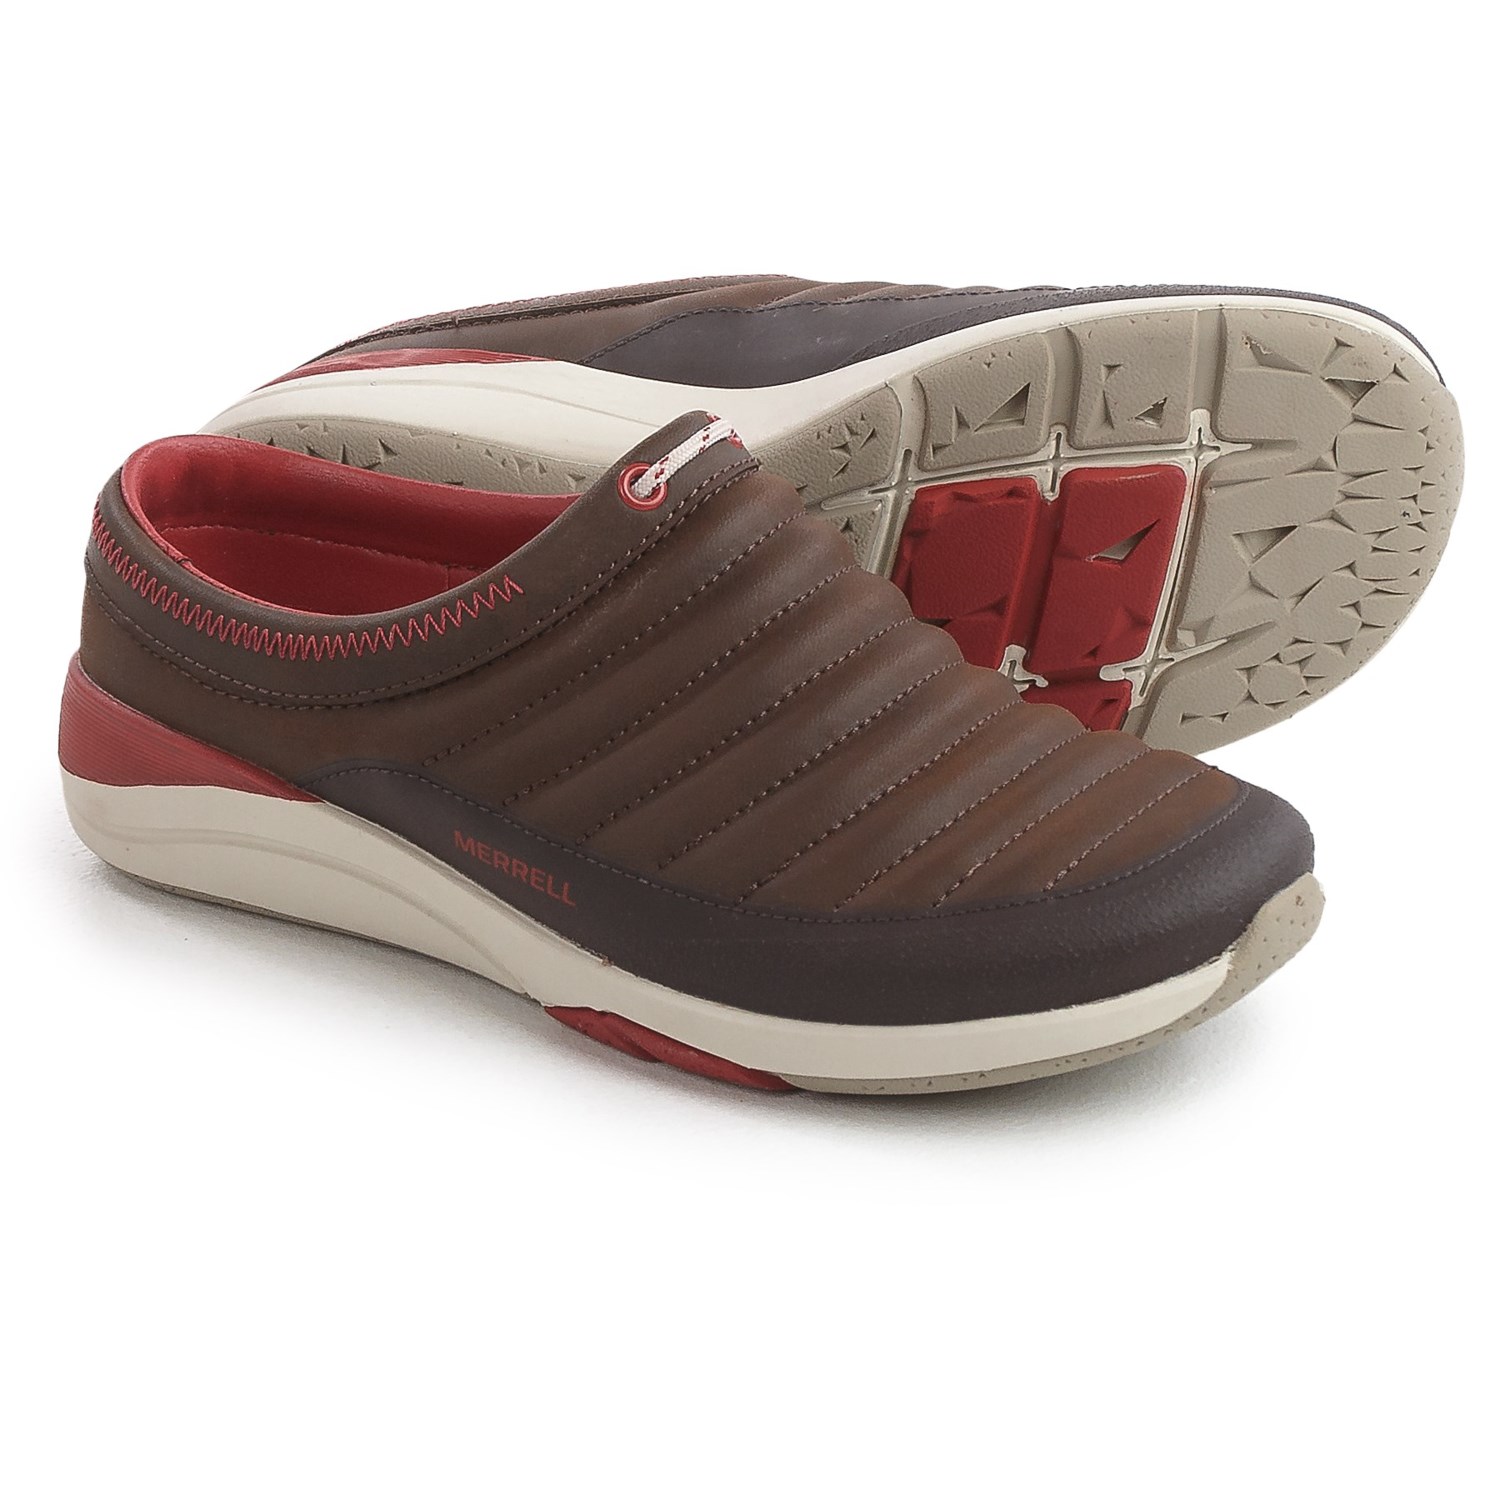 Merrell Applaud Slide Shoes (For Women) - Save 44%